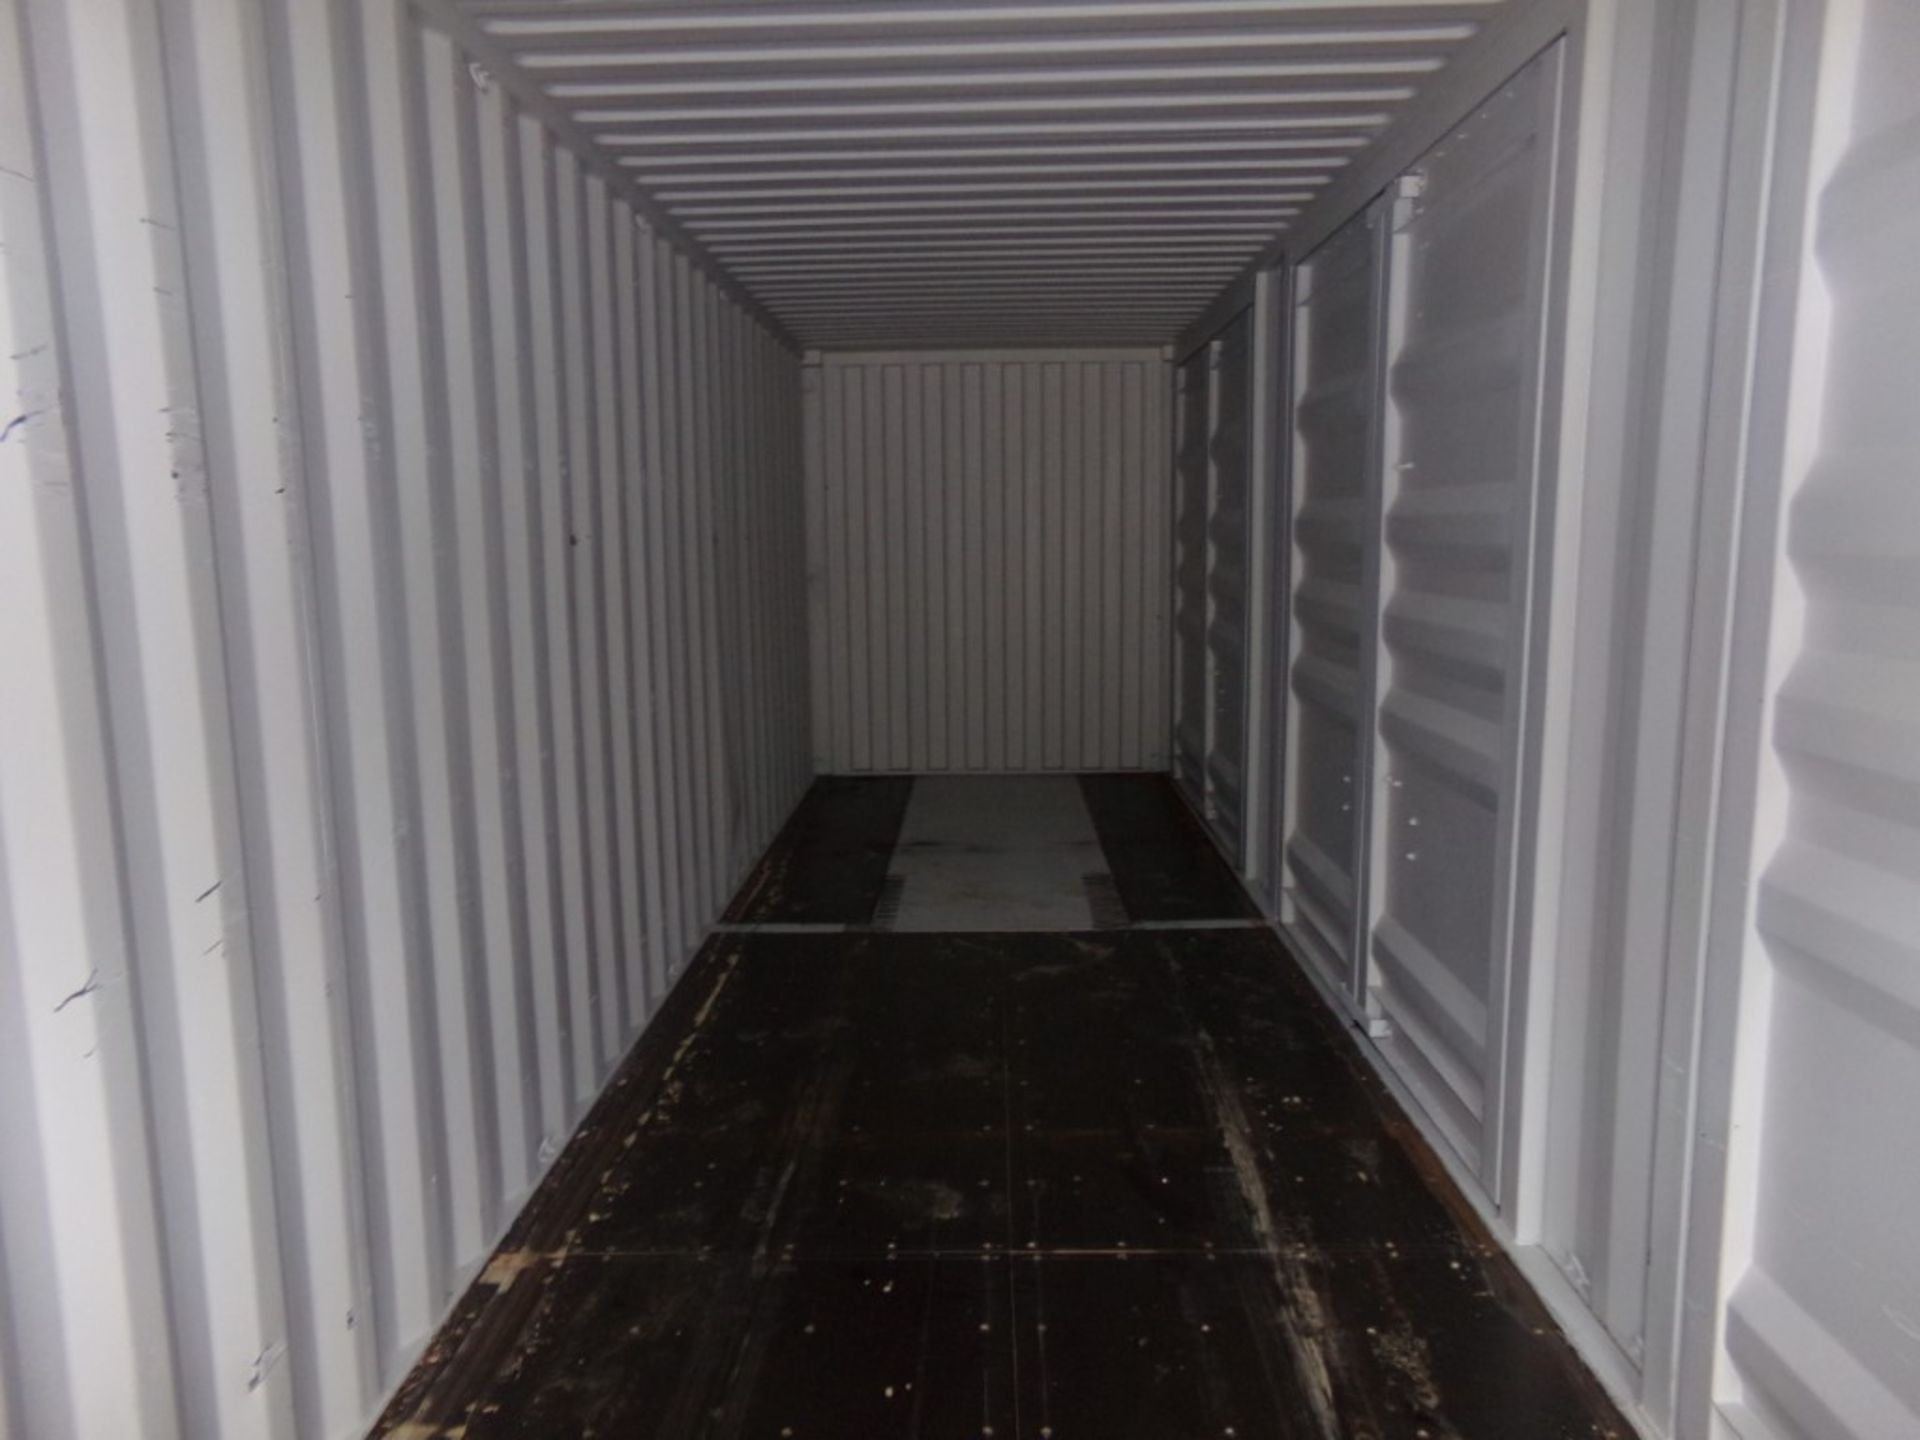 New 40' Container wirh (4) Side Access Doors and Barn Doors on 1 End, Cont. # CFGU4001973 - Image 5 of 5